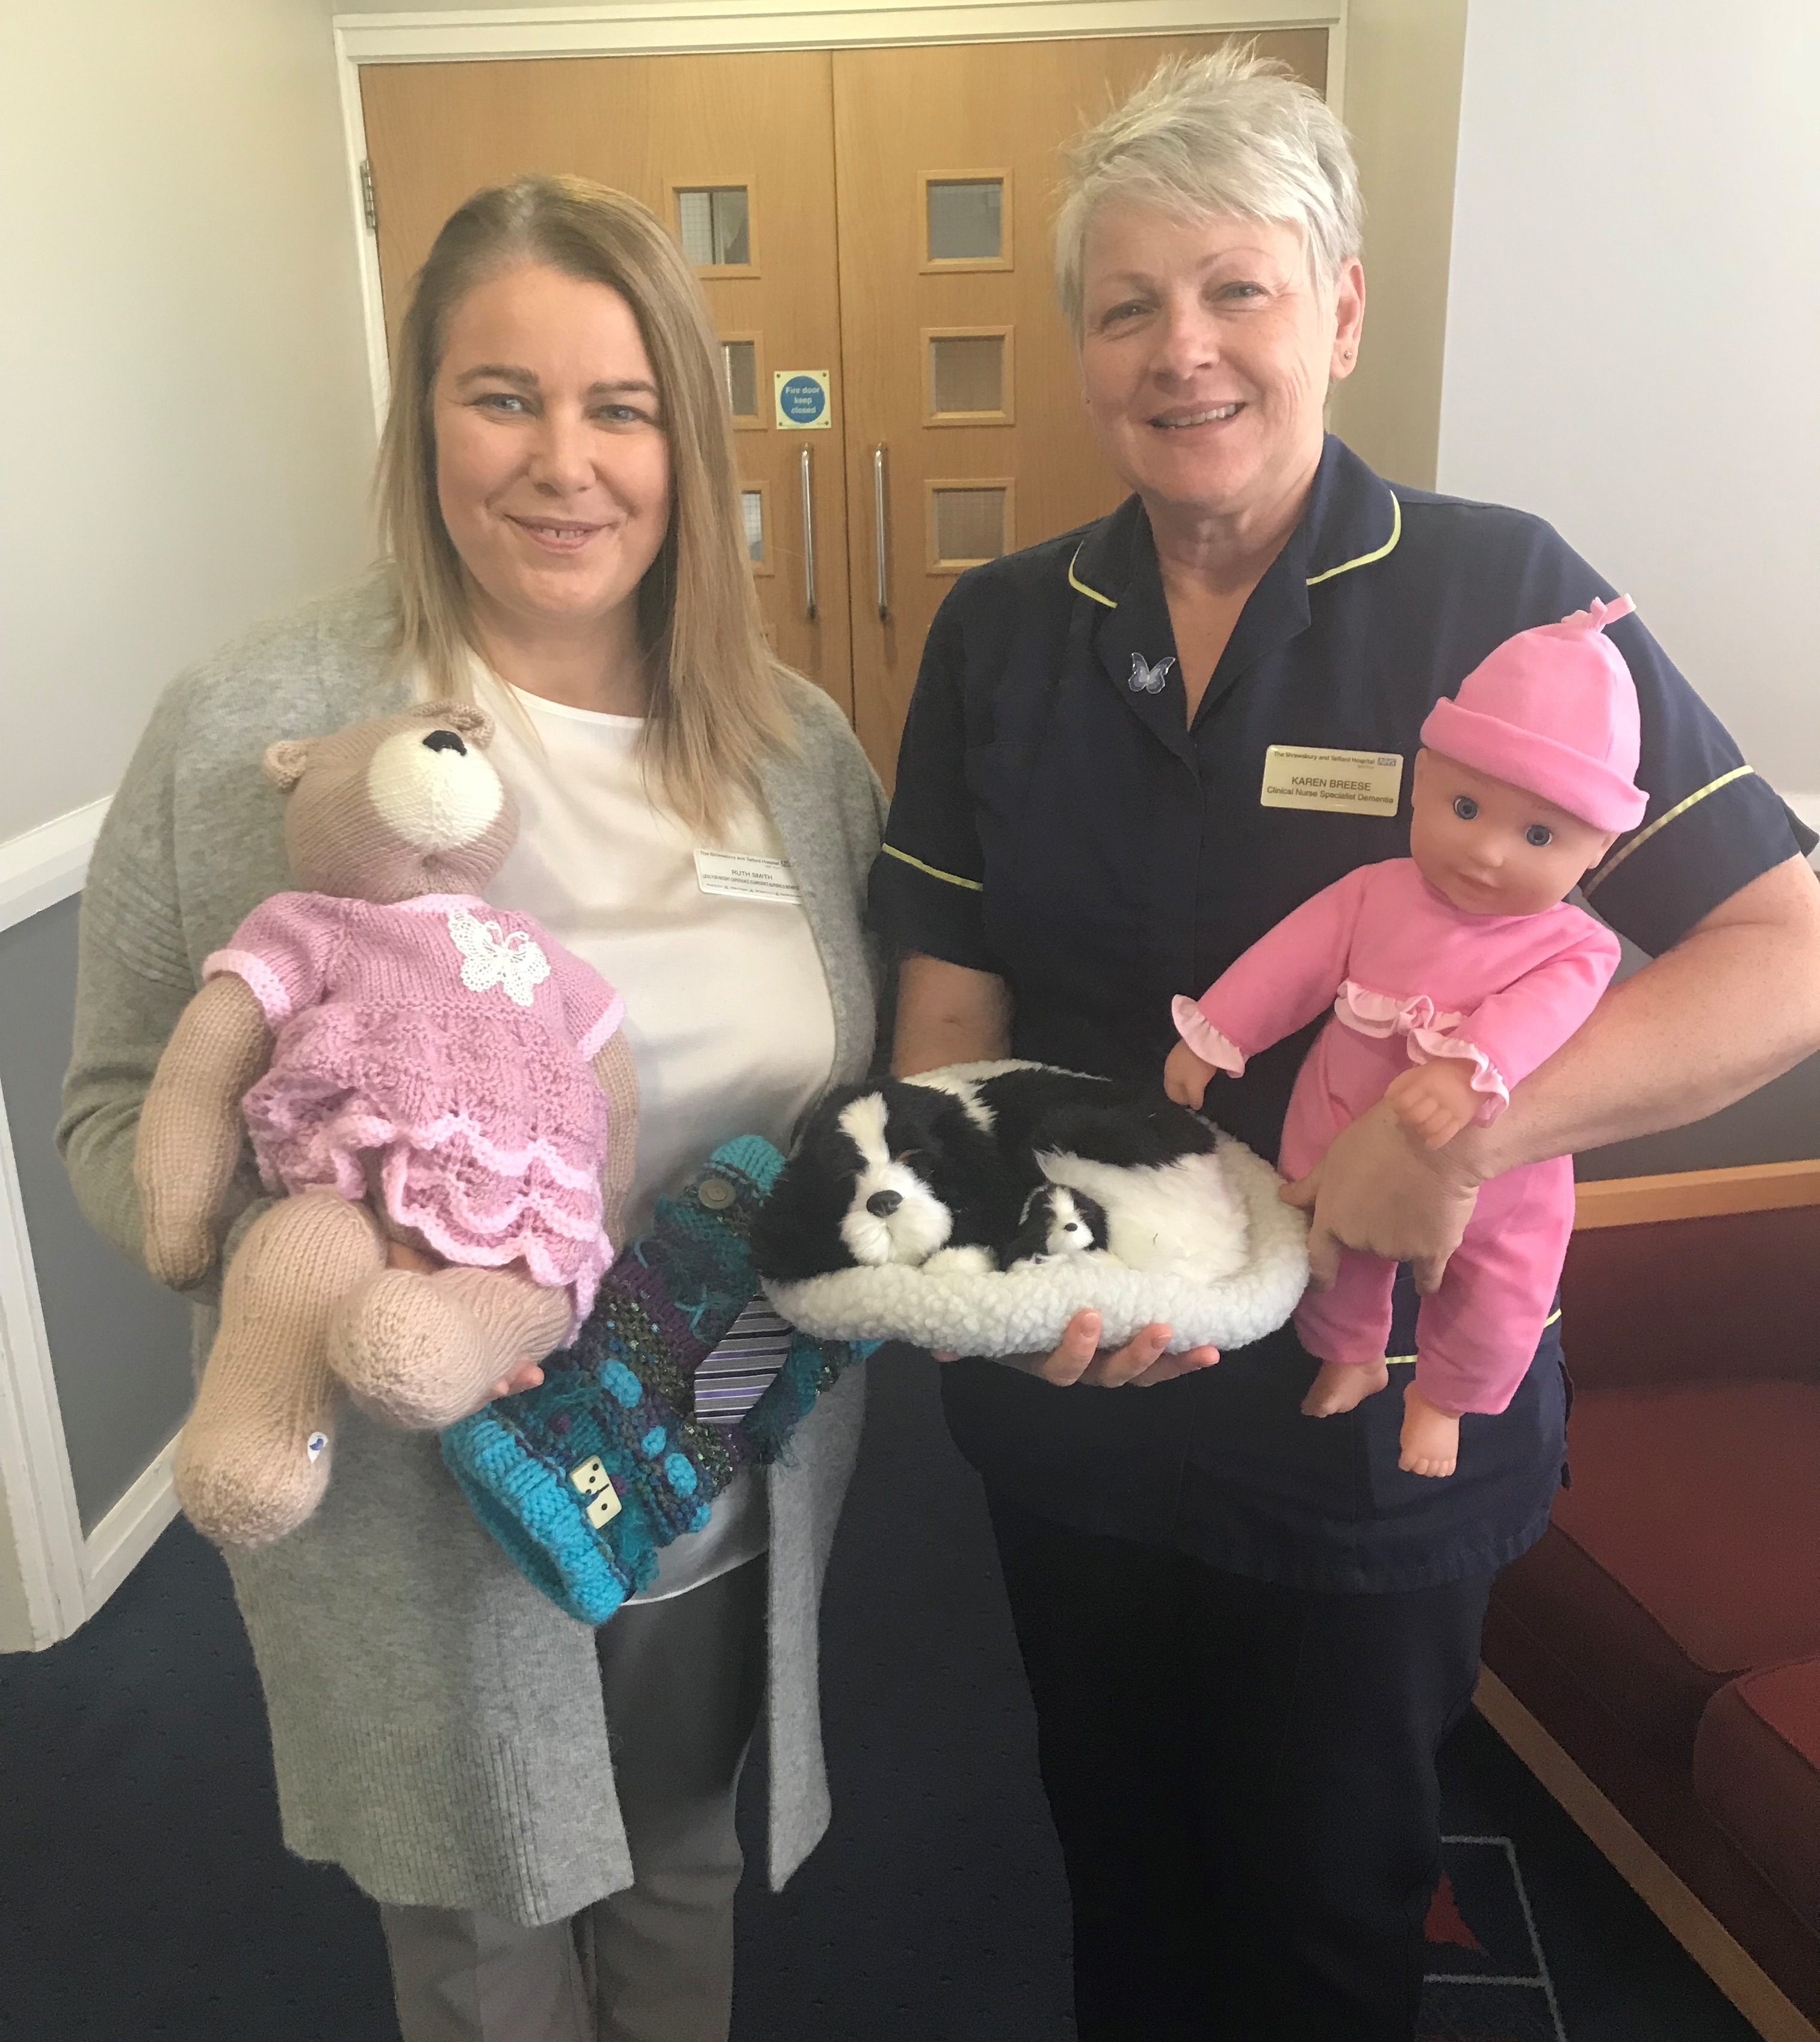 doll therapy for dementia patients